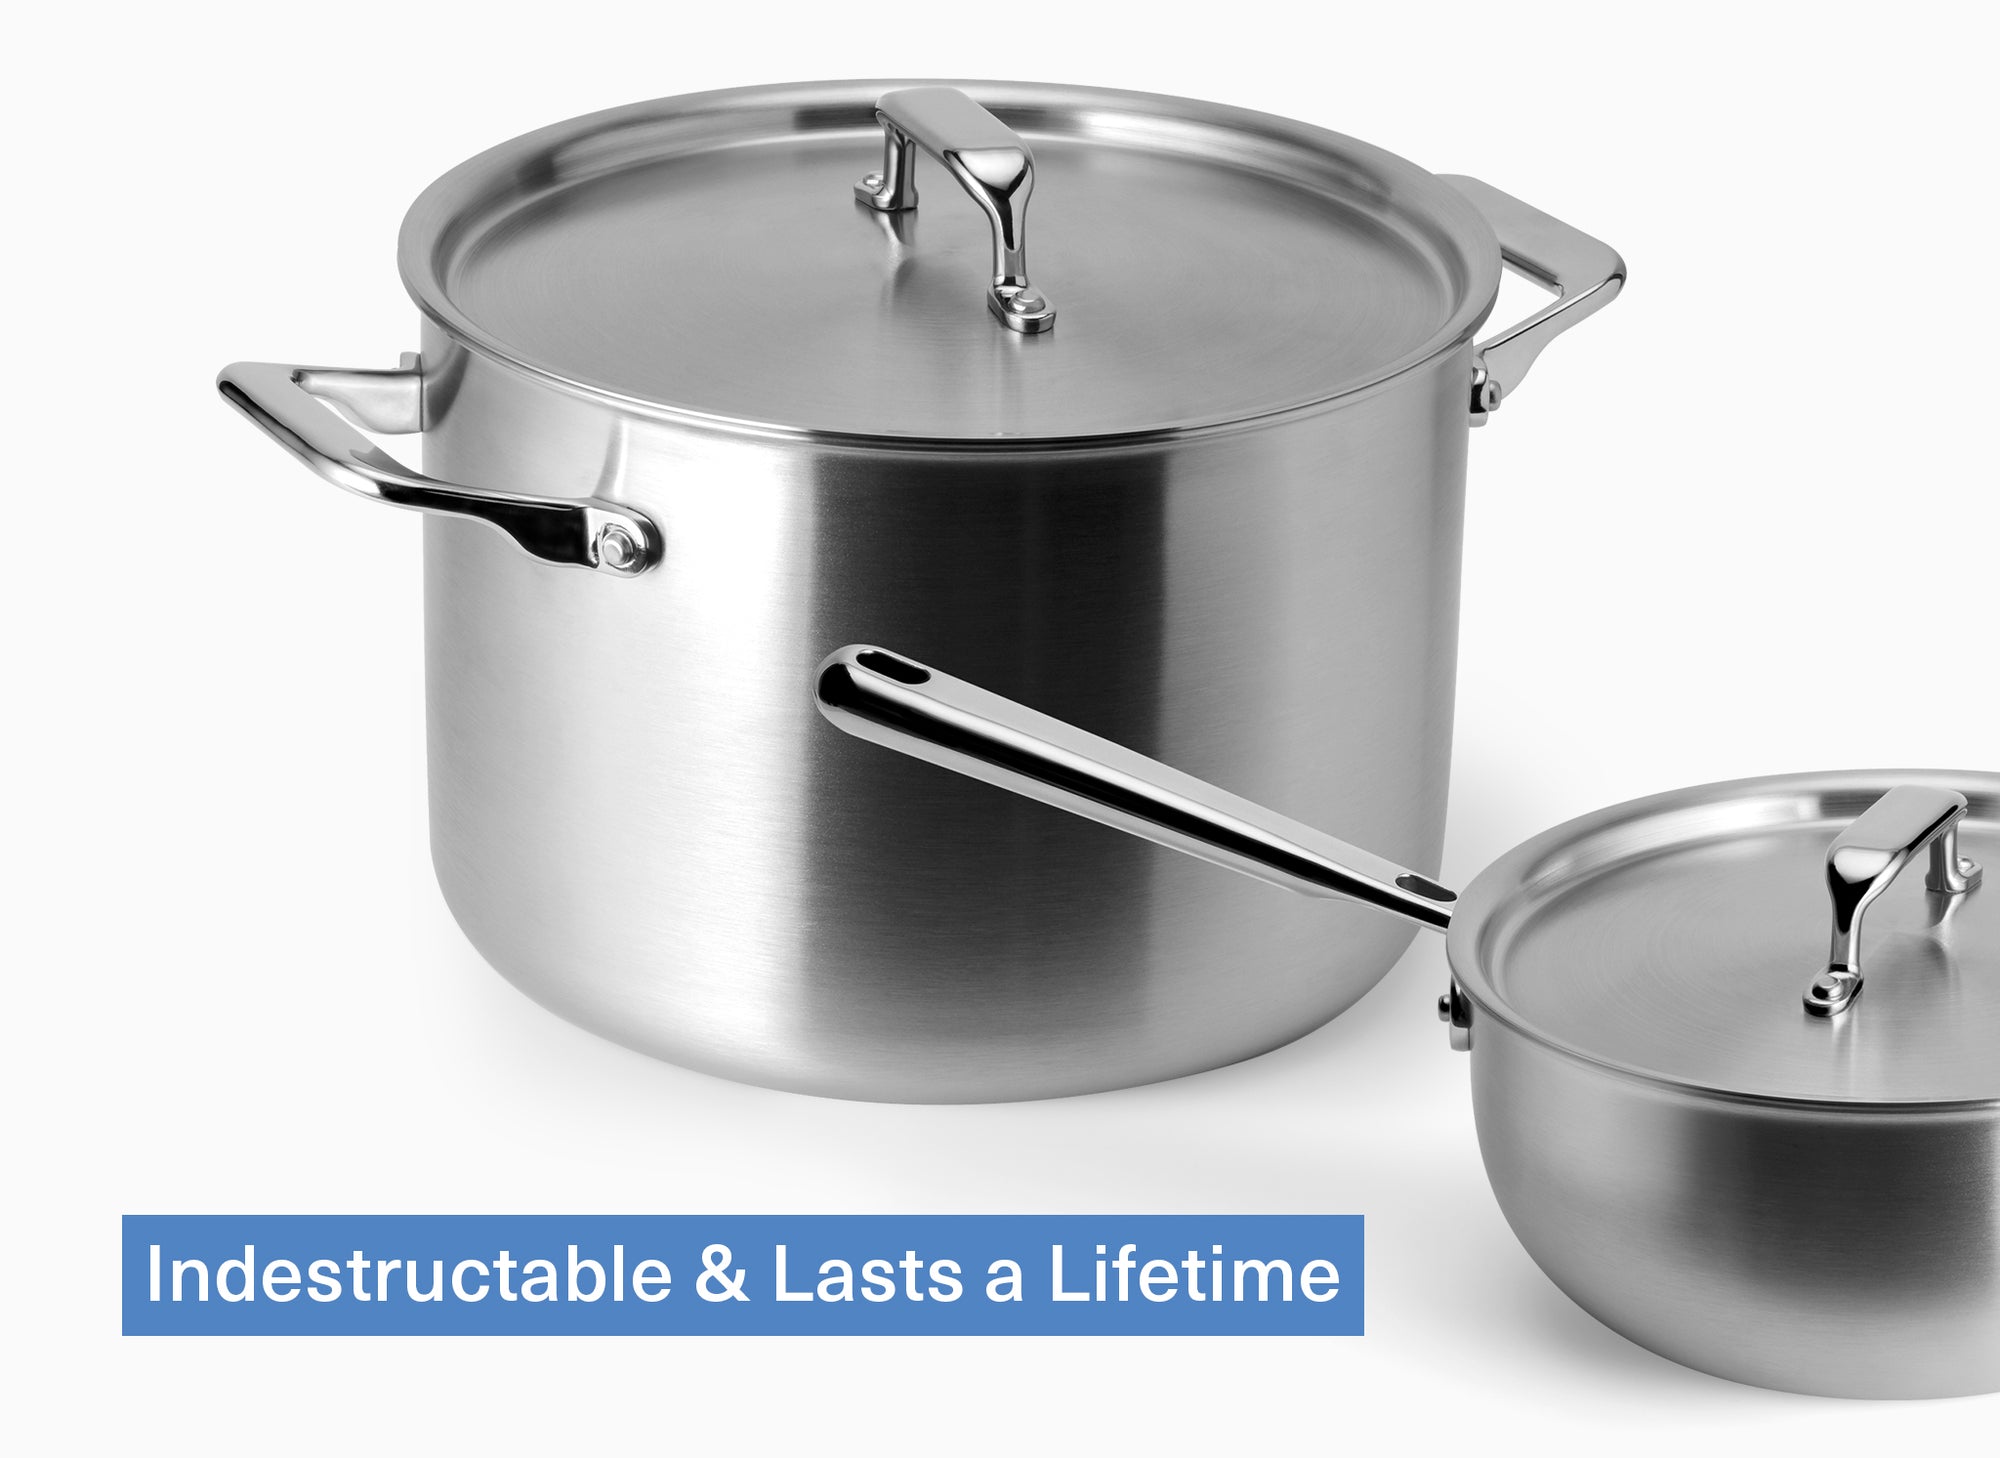 Stainless Cookware Set